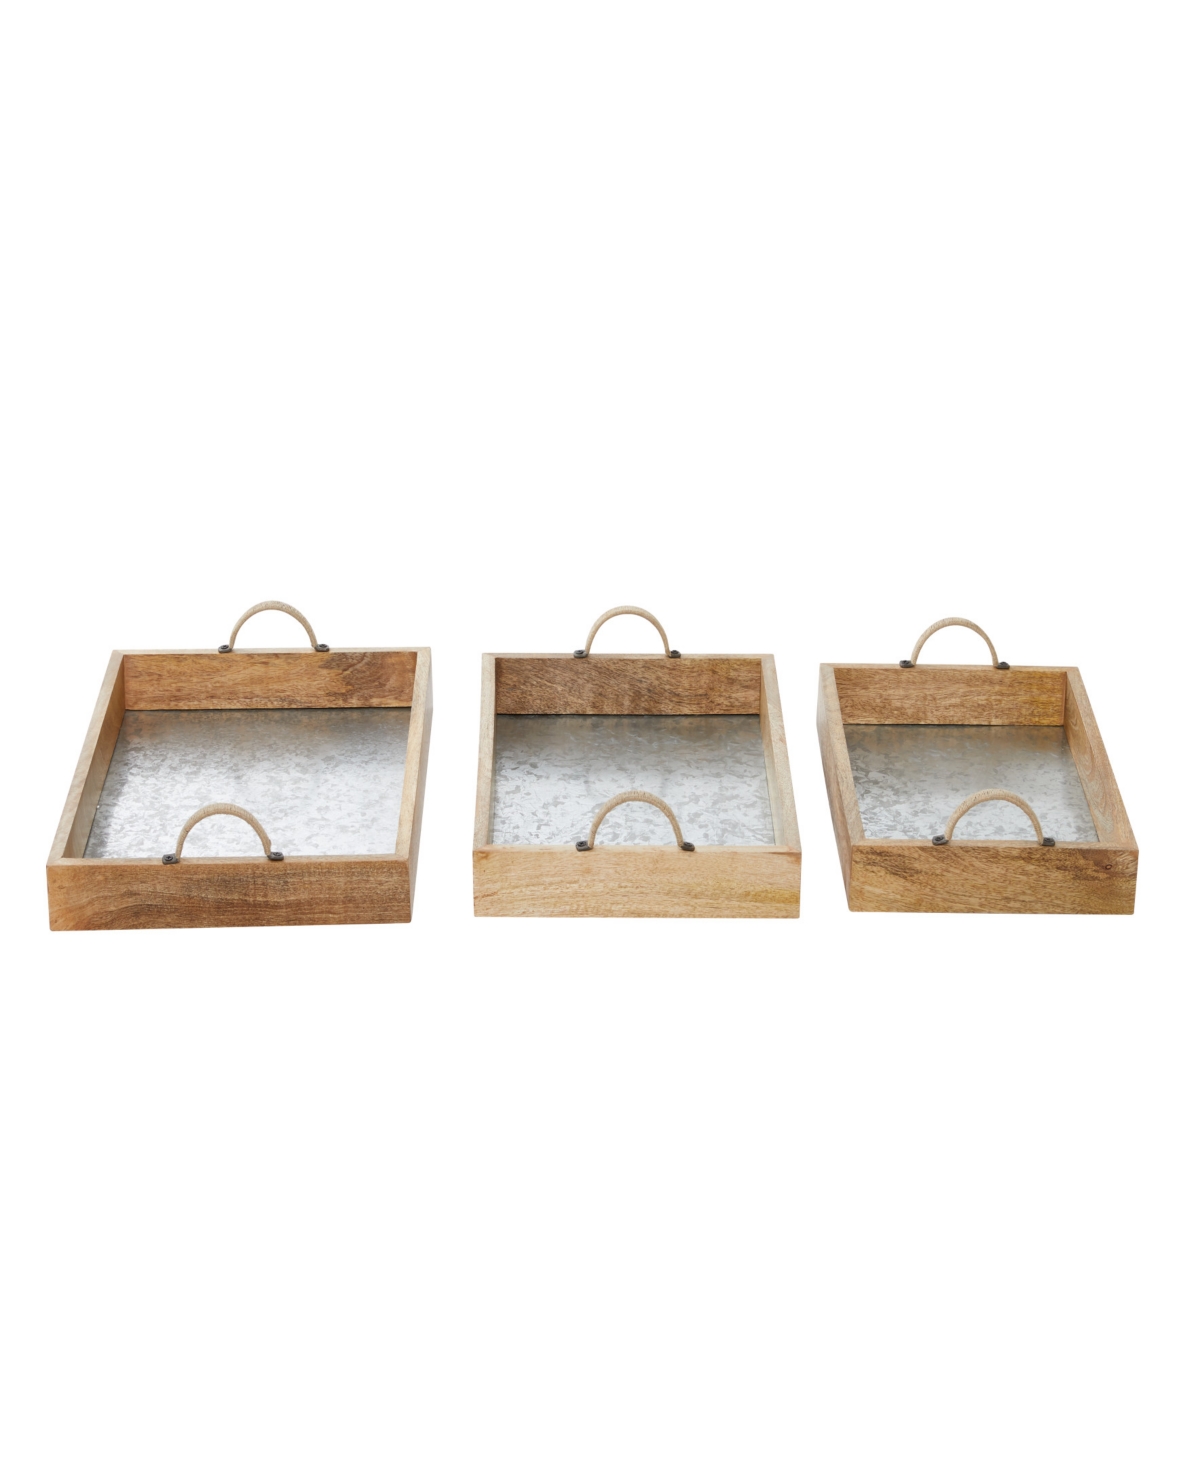 Rosemary Lane Wood Tray With Galvanized Interior, Set Of 3, 15", 16", 17" W In Brown